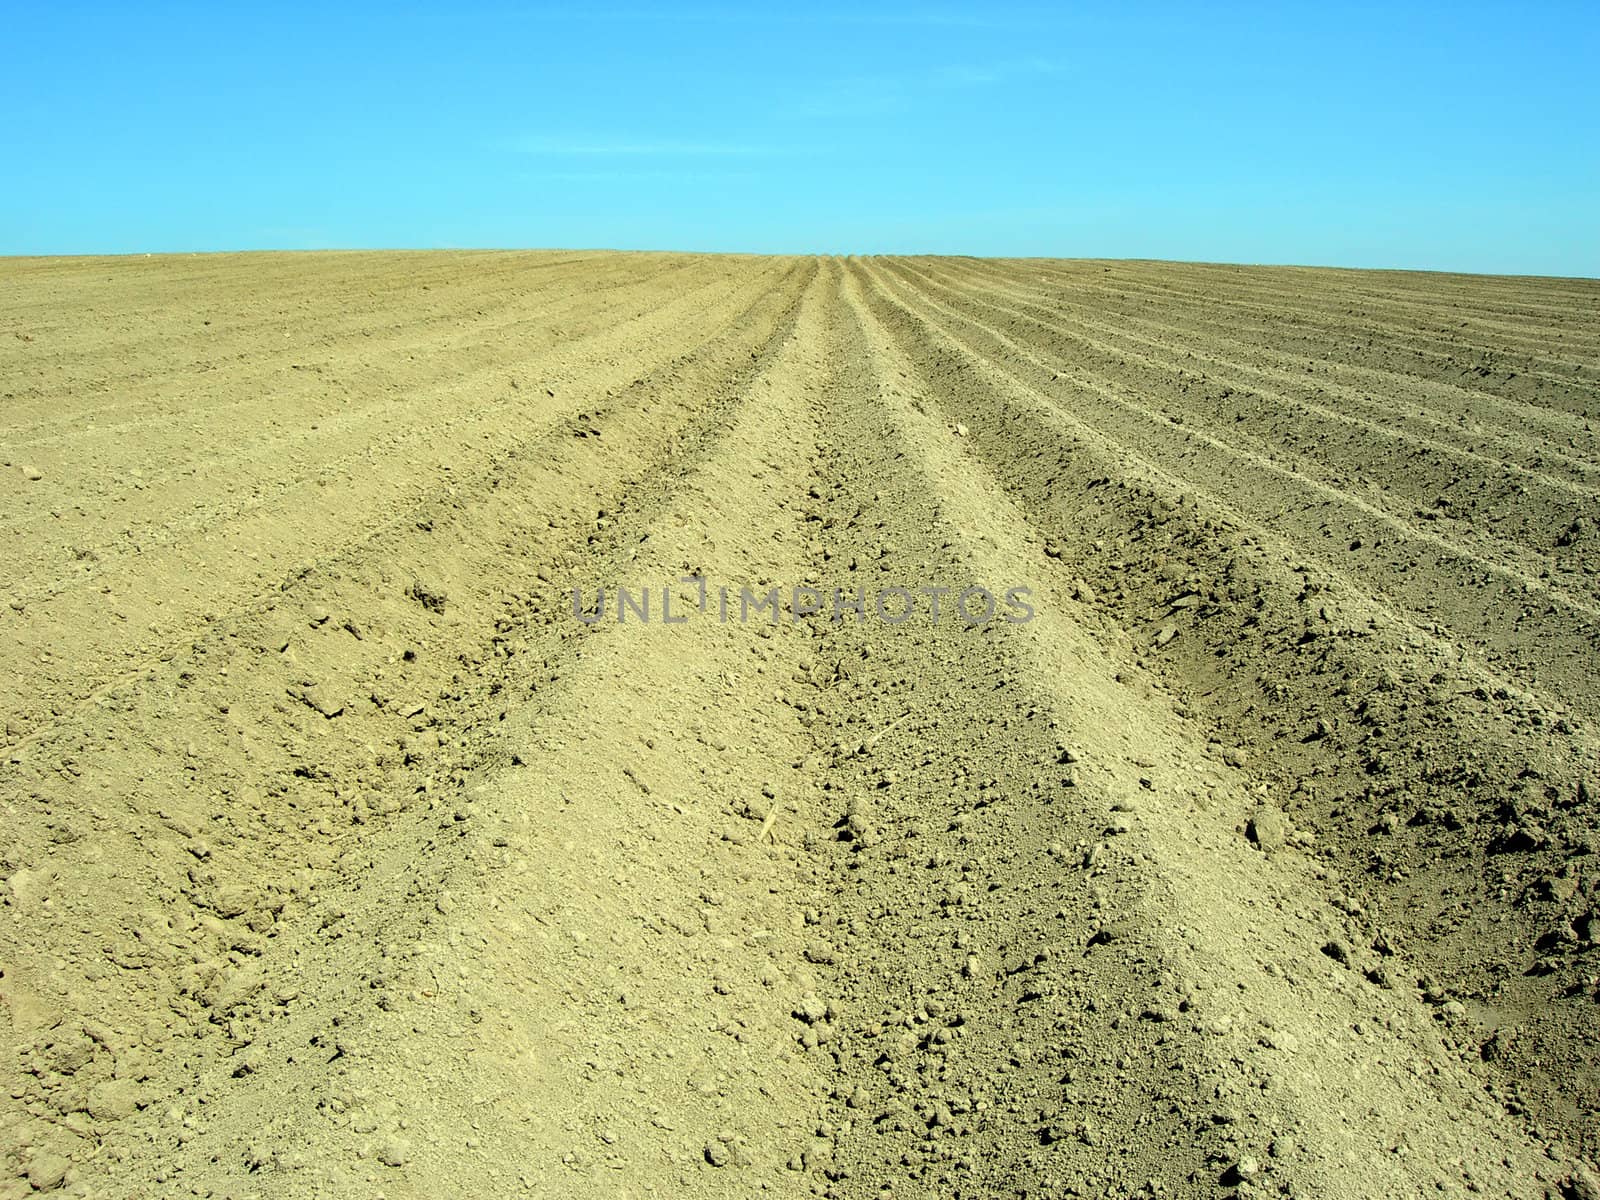  Farmland cultivated by plough after the harvest         